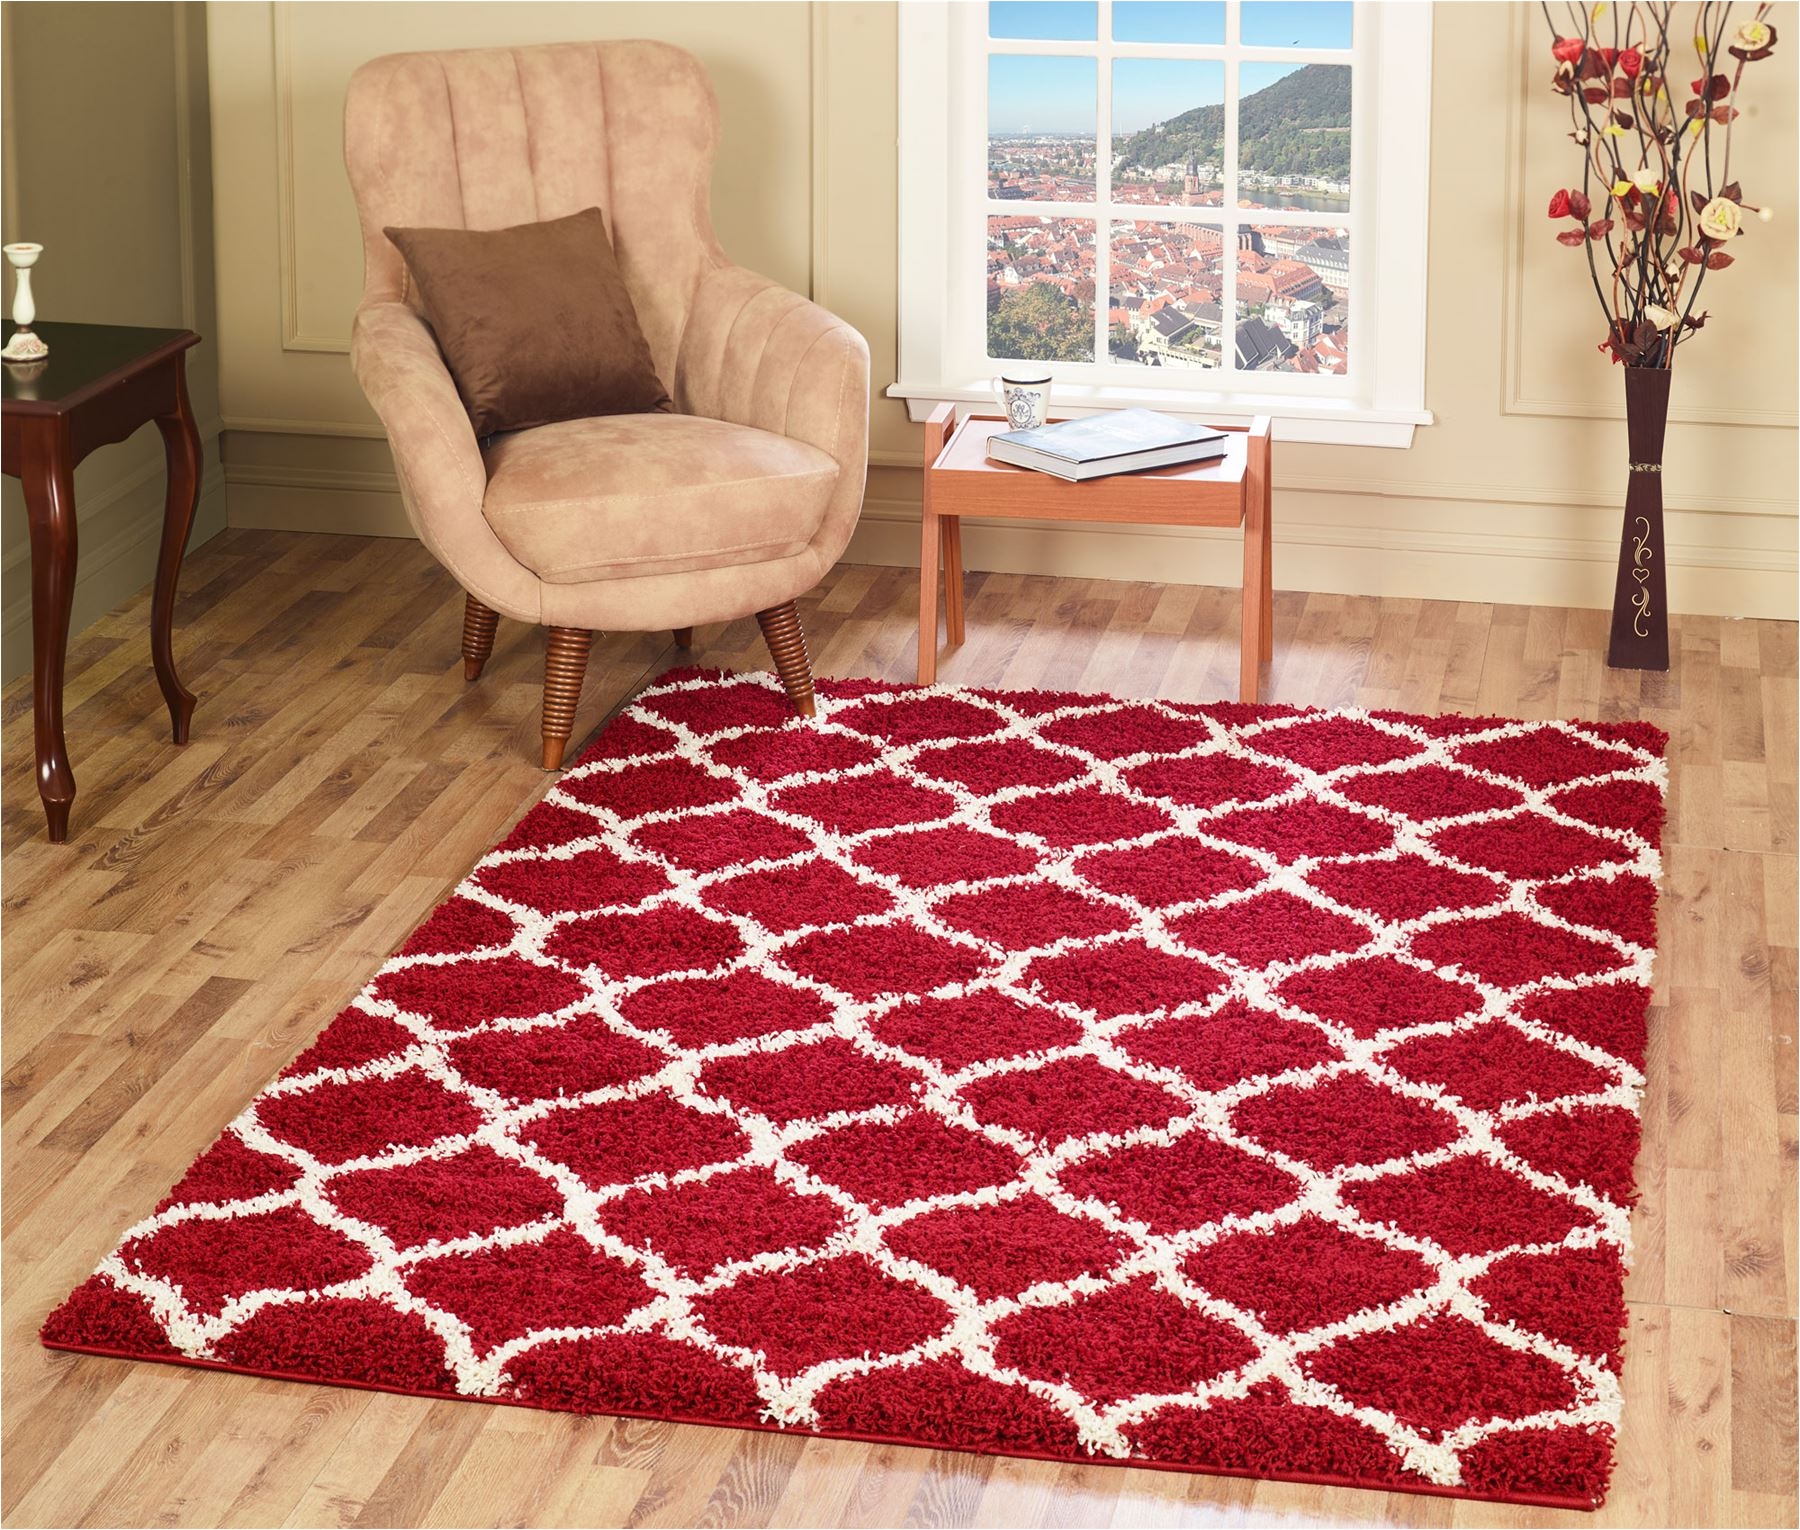 full size of soft area rugs soft area rugs soft area rugs 8x10 soft area rugs